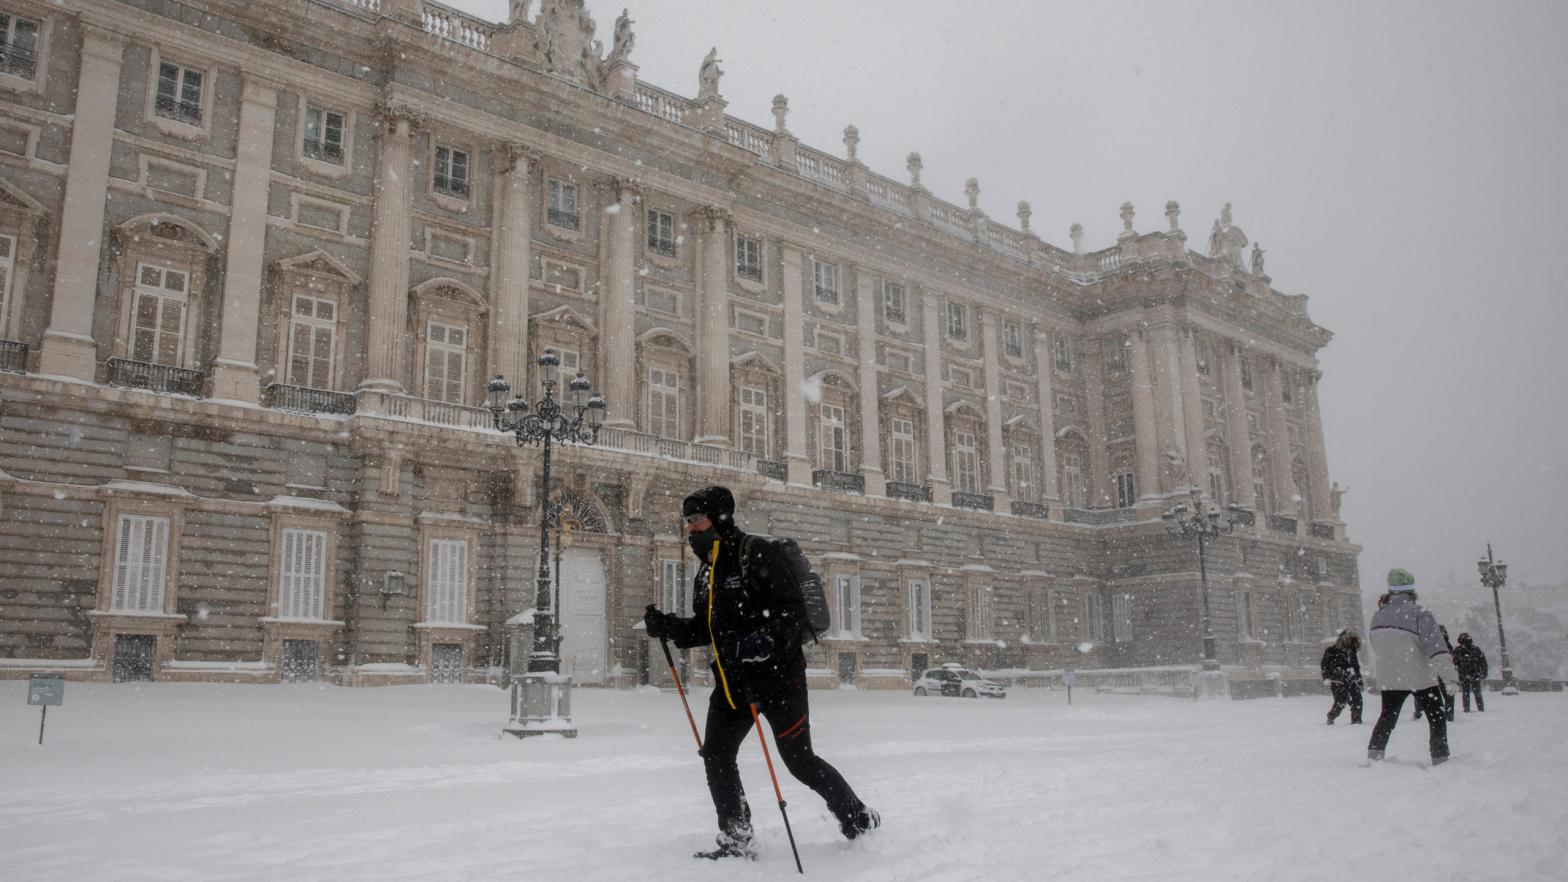 People walk on the snow next to the Royal Palace during heavy snowfall on January 09, 2021 in Madrid, Spain. (Photo: Pablo Blazquez Dominguez, Getty Images)